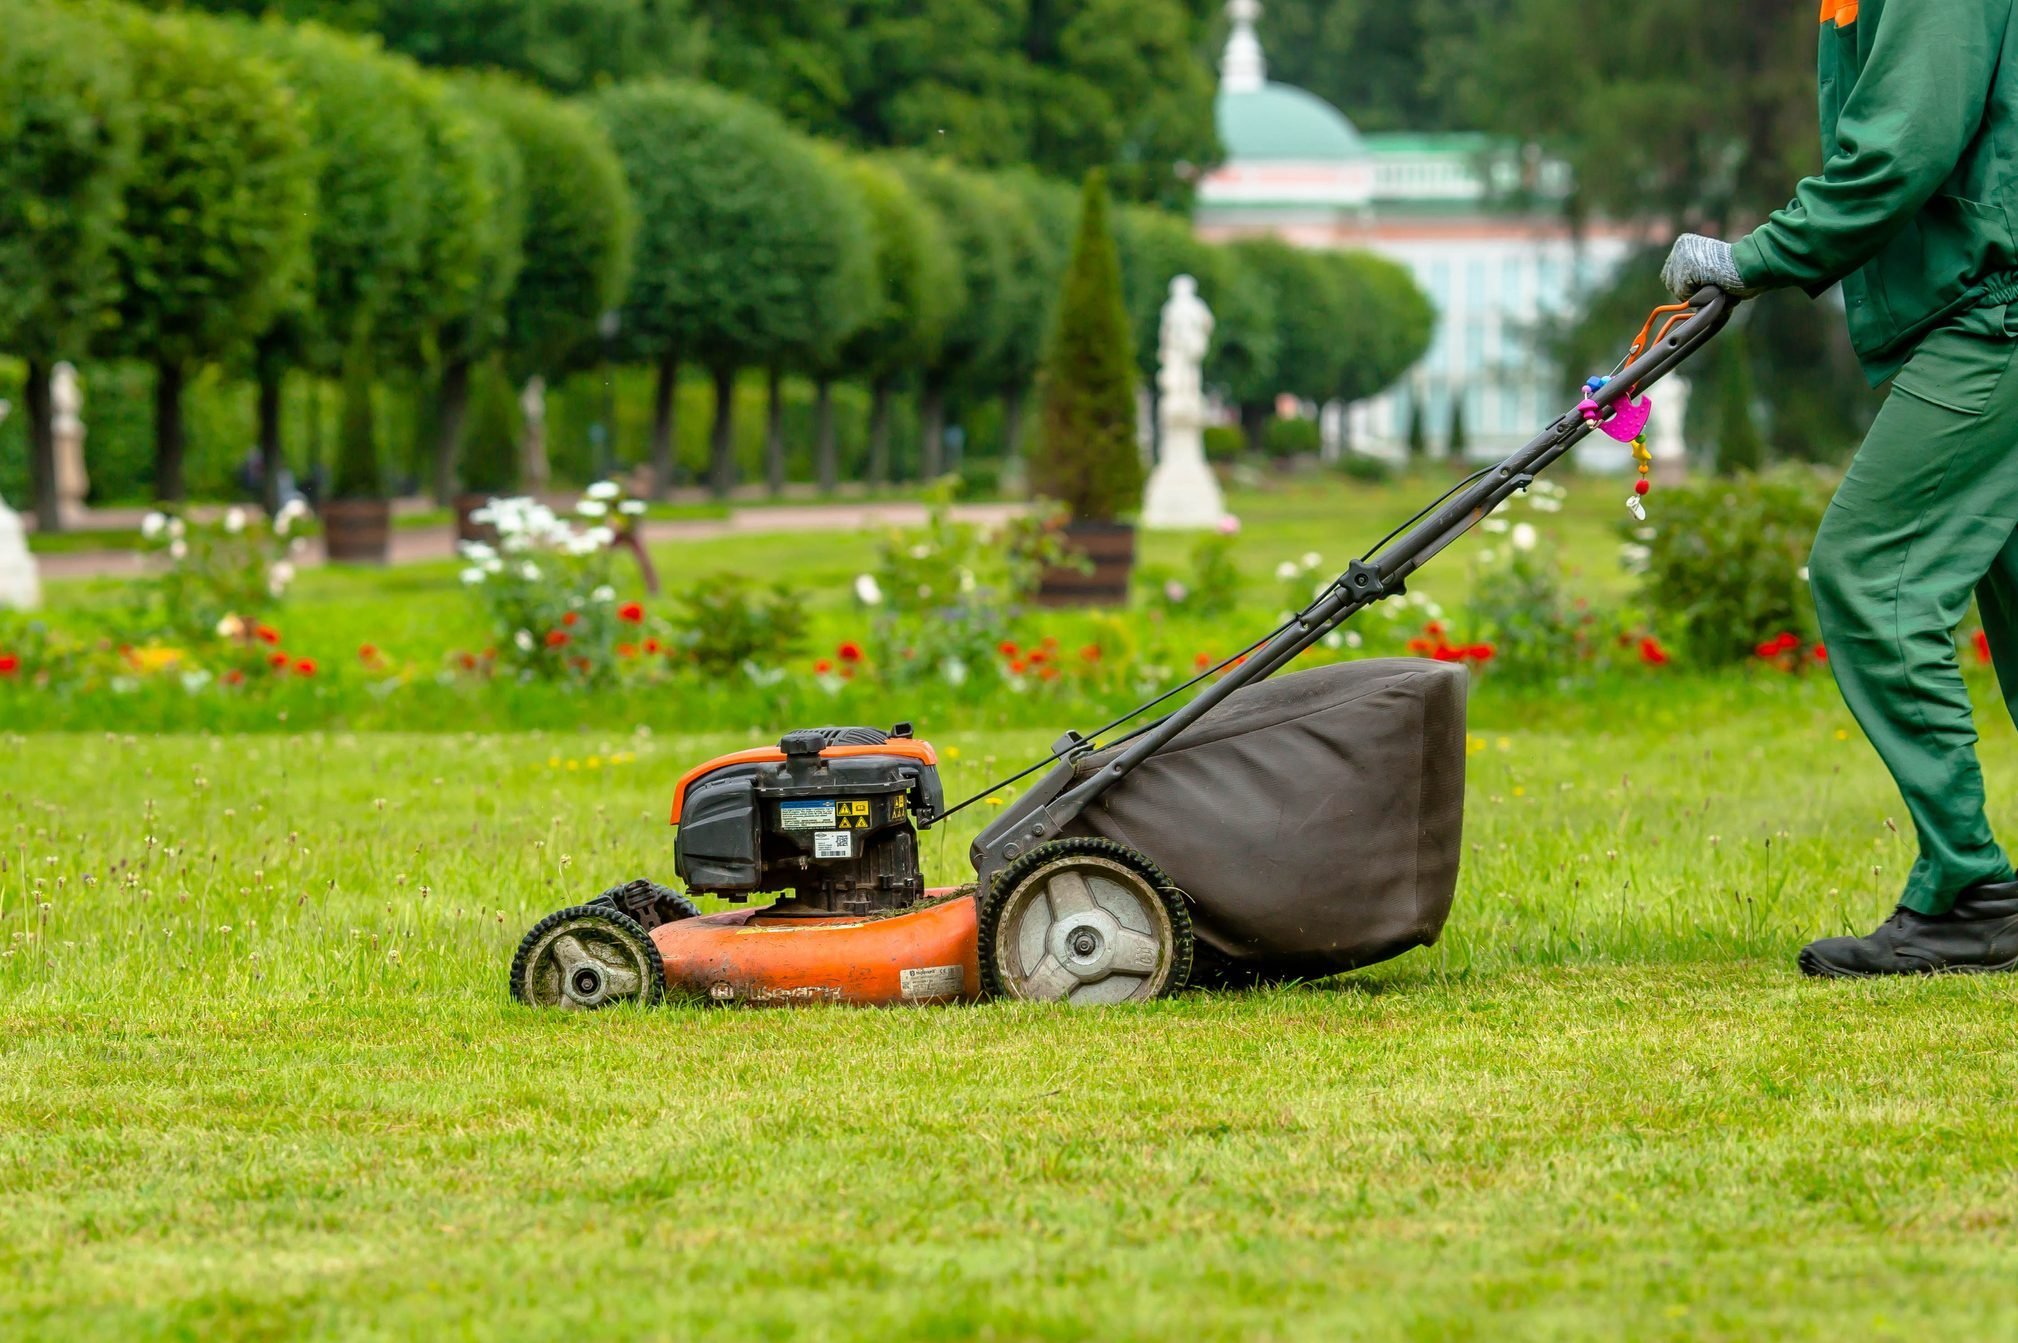 Self-Propelled vs. Push Mower: What's the Difference?